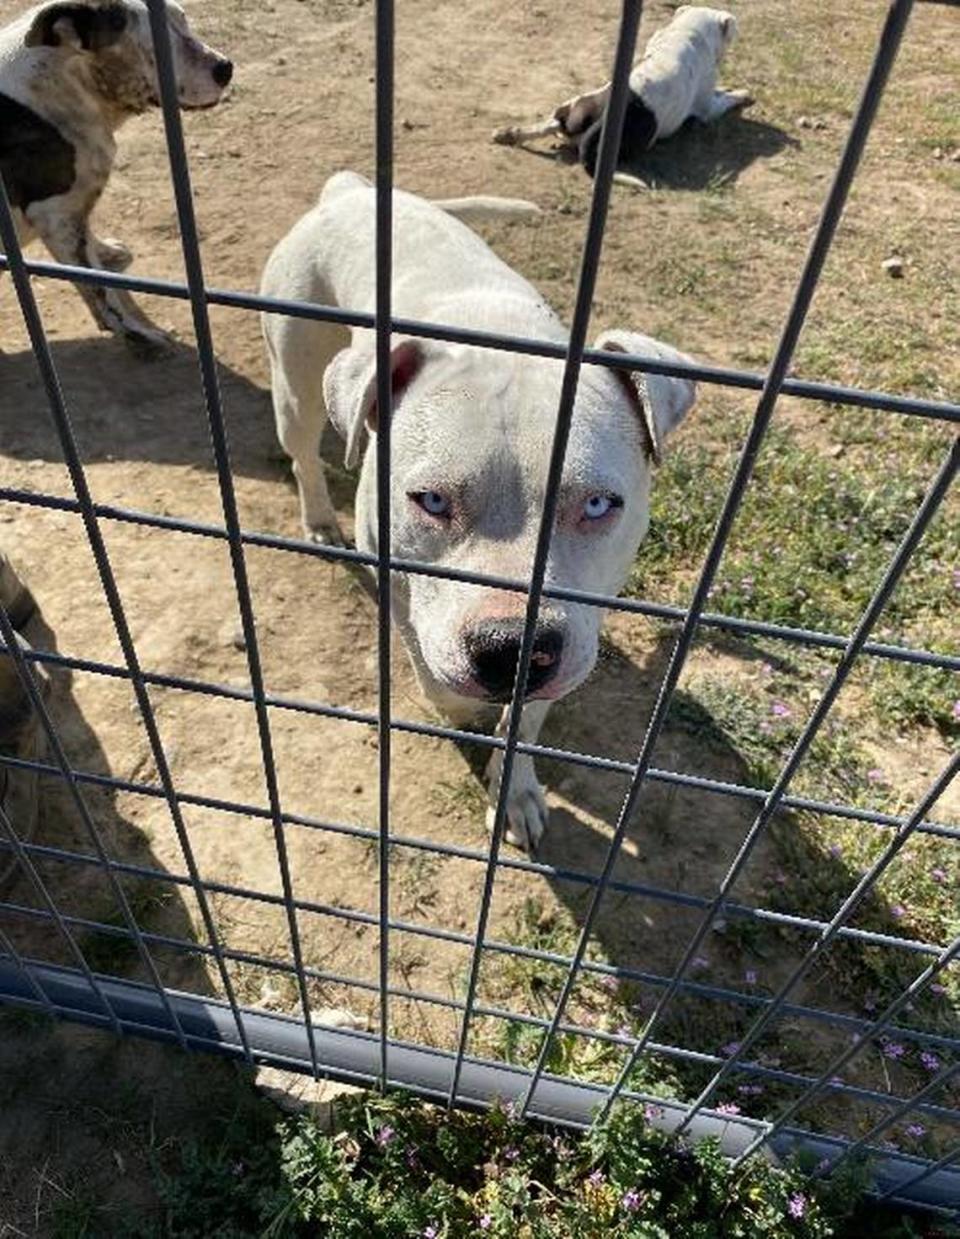 A pit bull involved in an attack on neighbors was taken by Benton County Animal Control. Only three of the seven dogs involved in the attack were taken. The others continued to try and attack neighbors for more than a year, according to police reports.